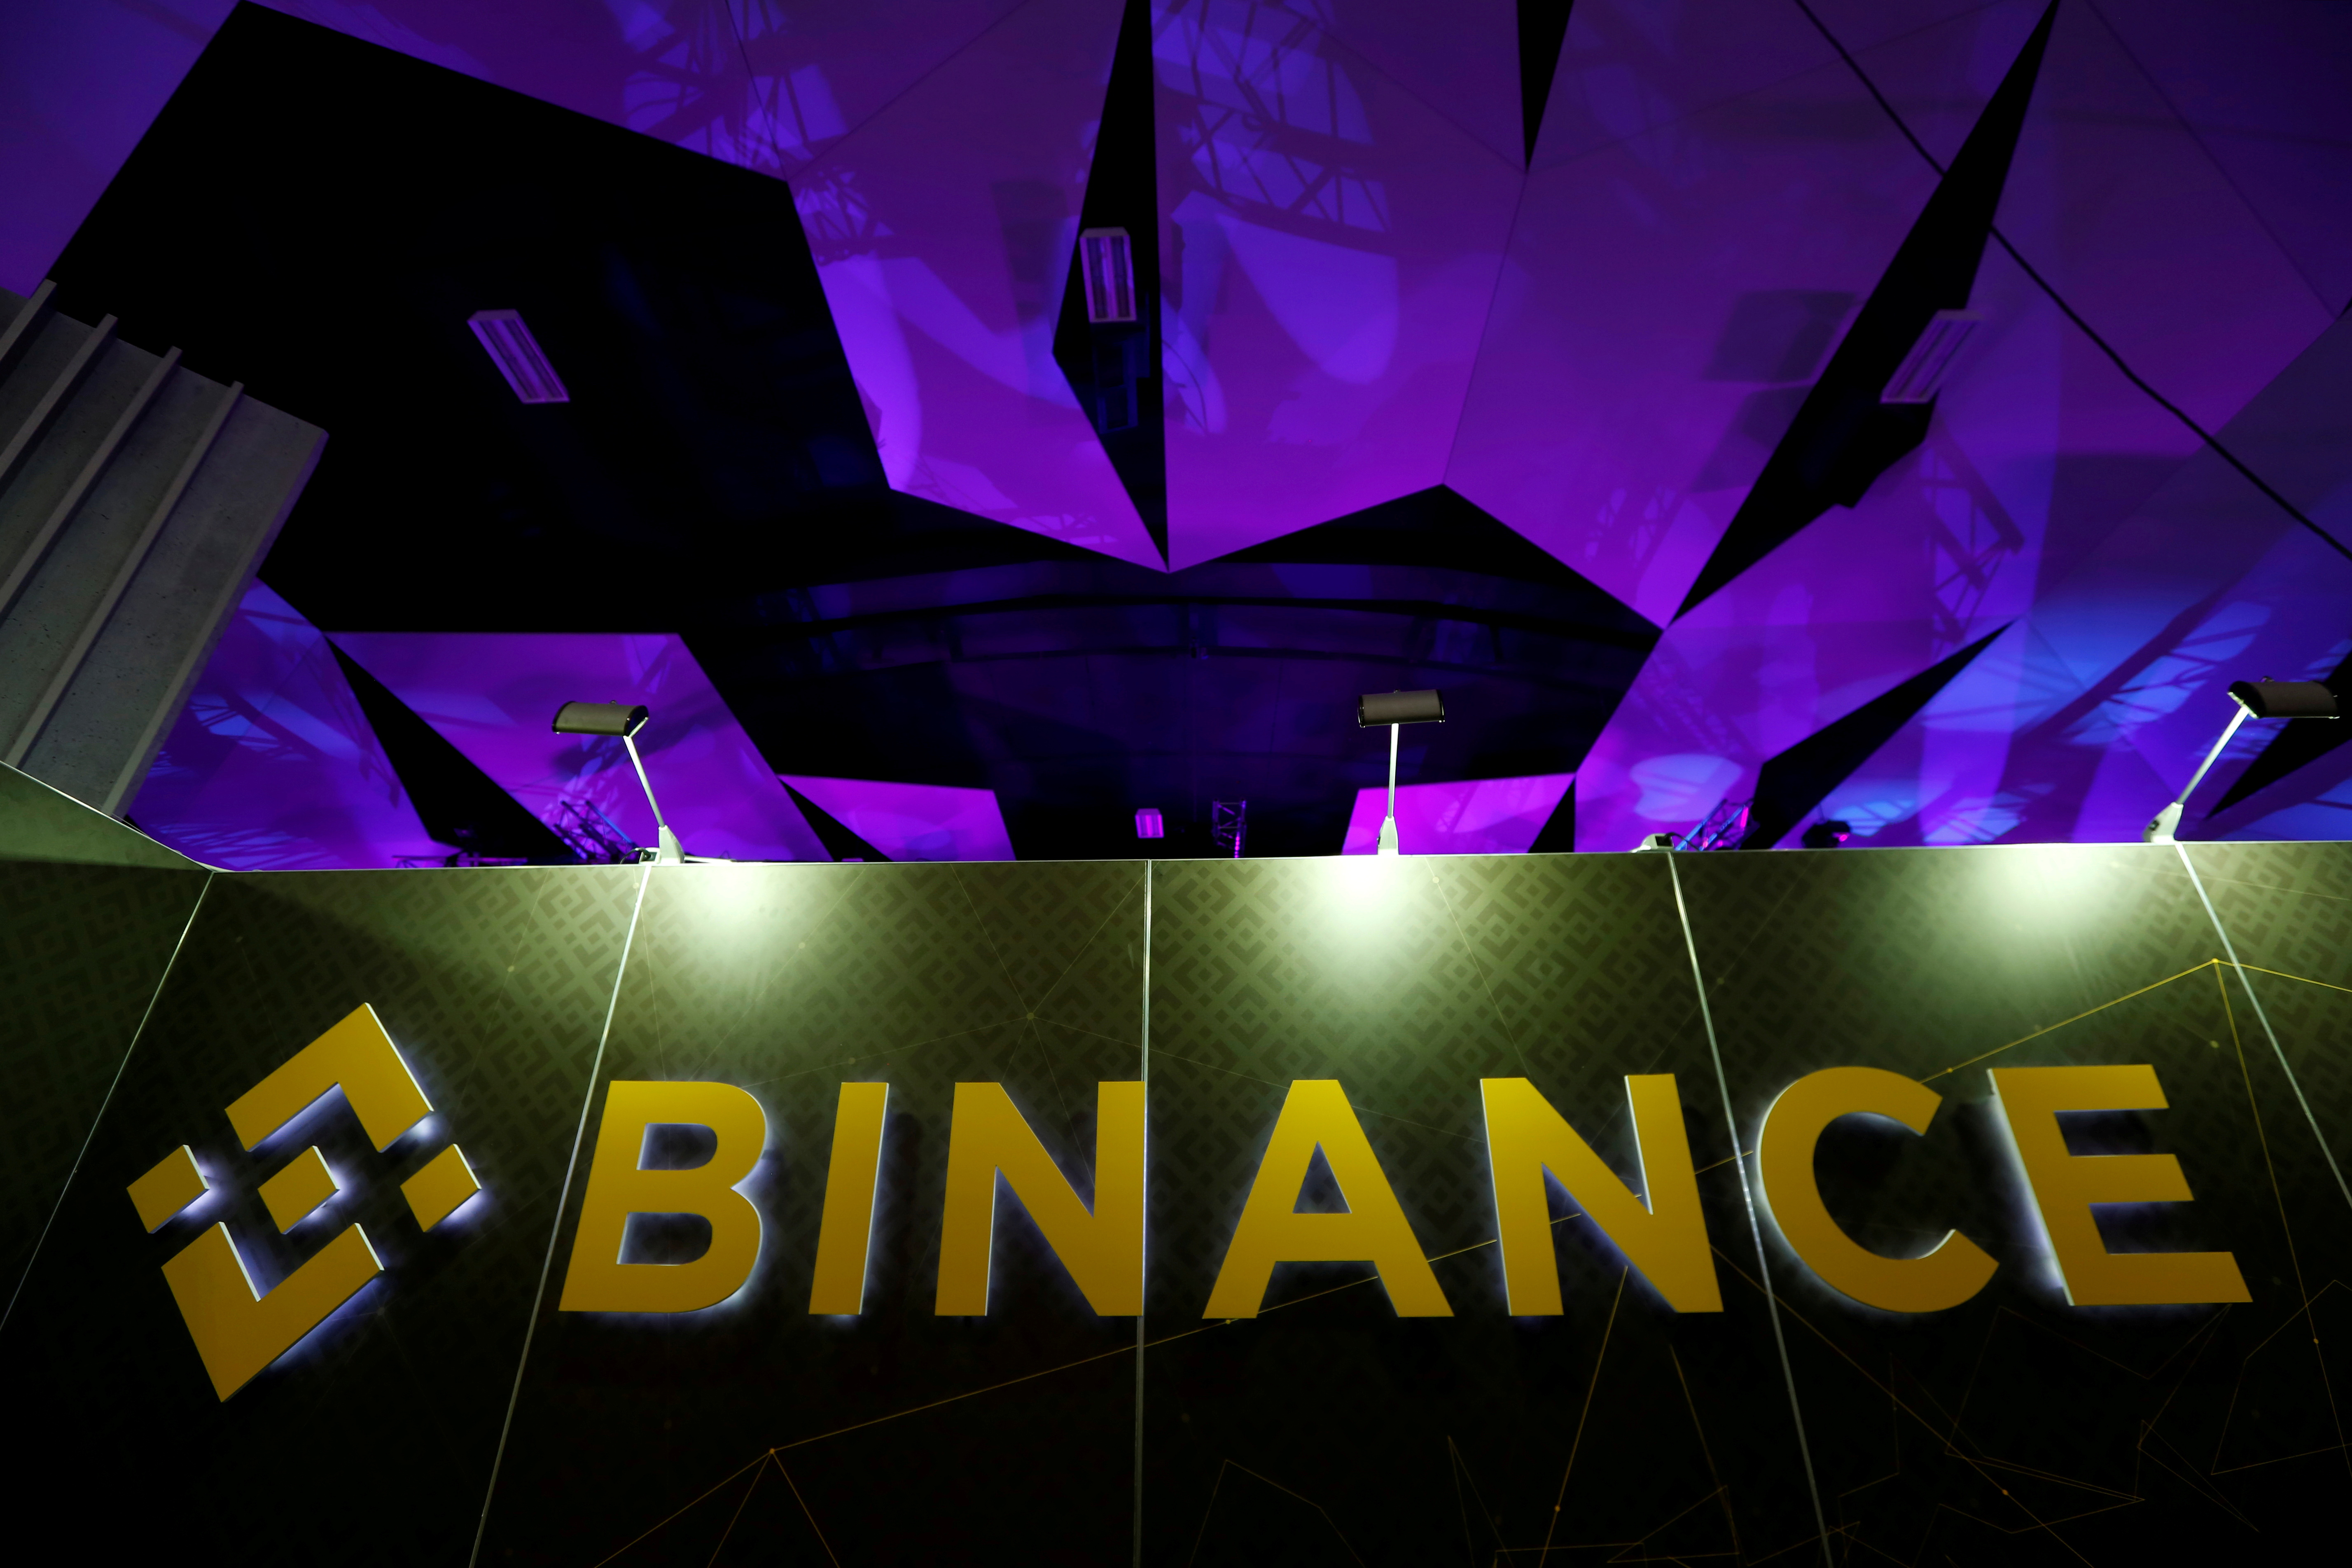 The logo of Binance is seen on their exhibition stand at the Delta Summit, Malta's official Blockchain and Digital Innovation event promoting cryptocurrency, in St Julian's, Malta October 4, 2018. REUTERS/Darrin Zammit Lupi/File Photo